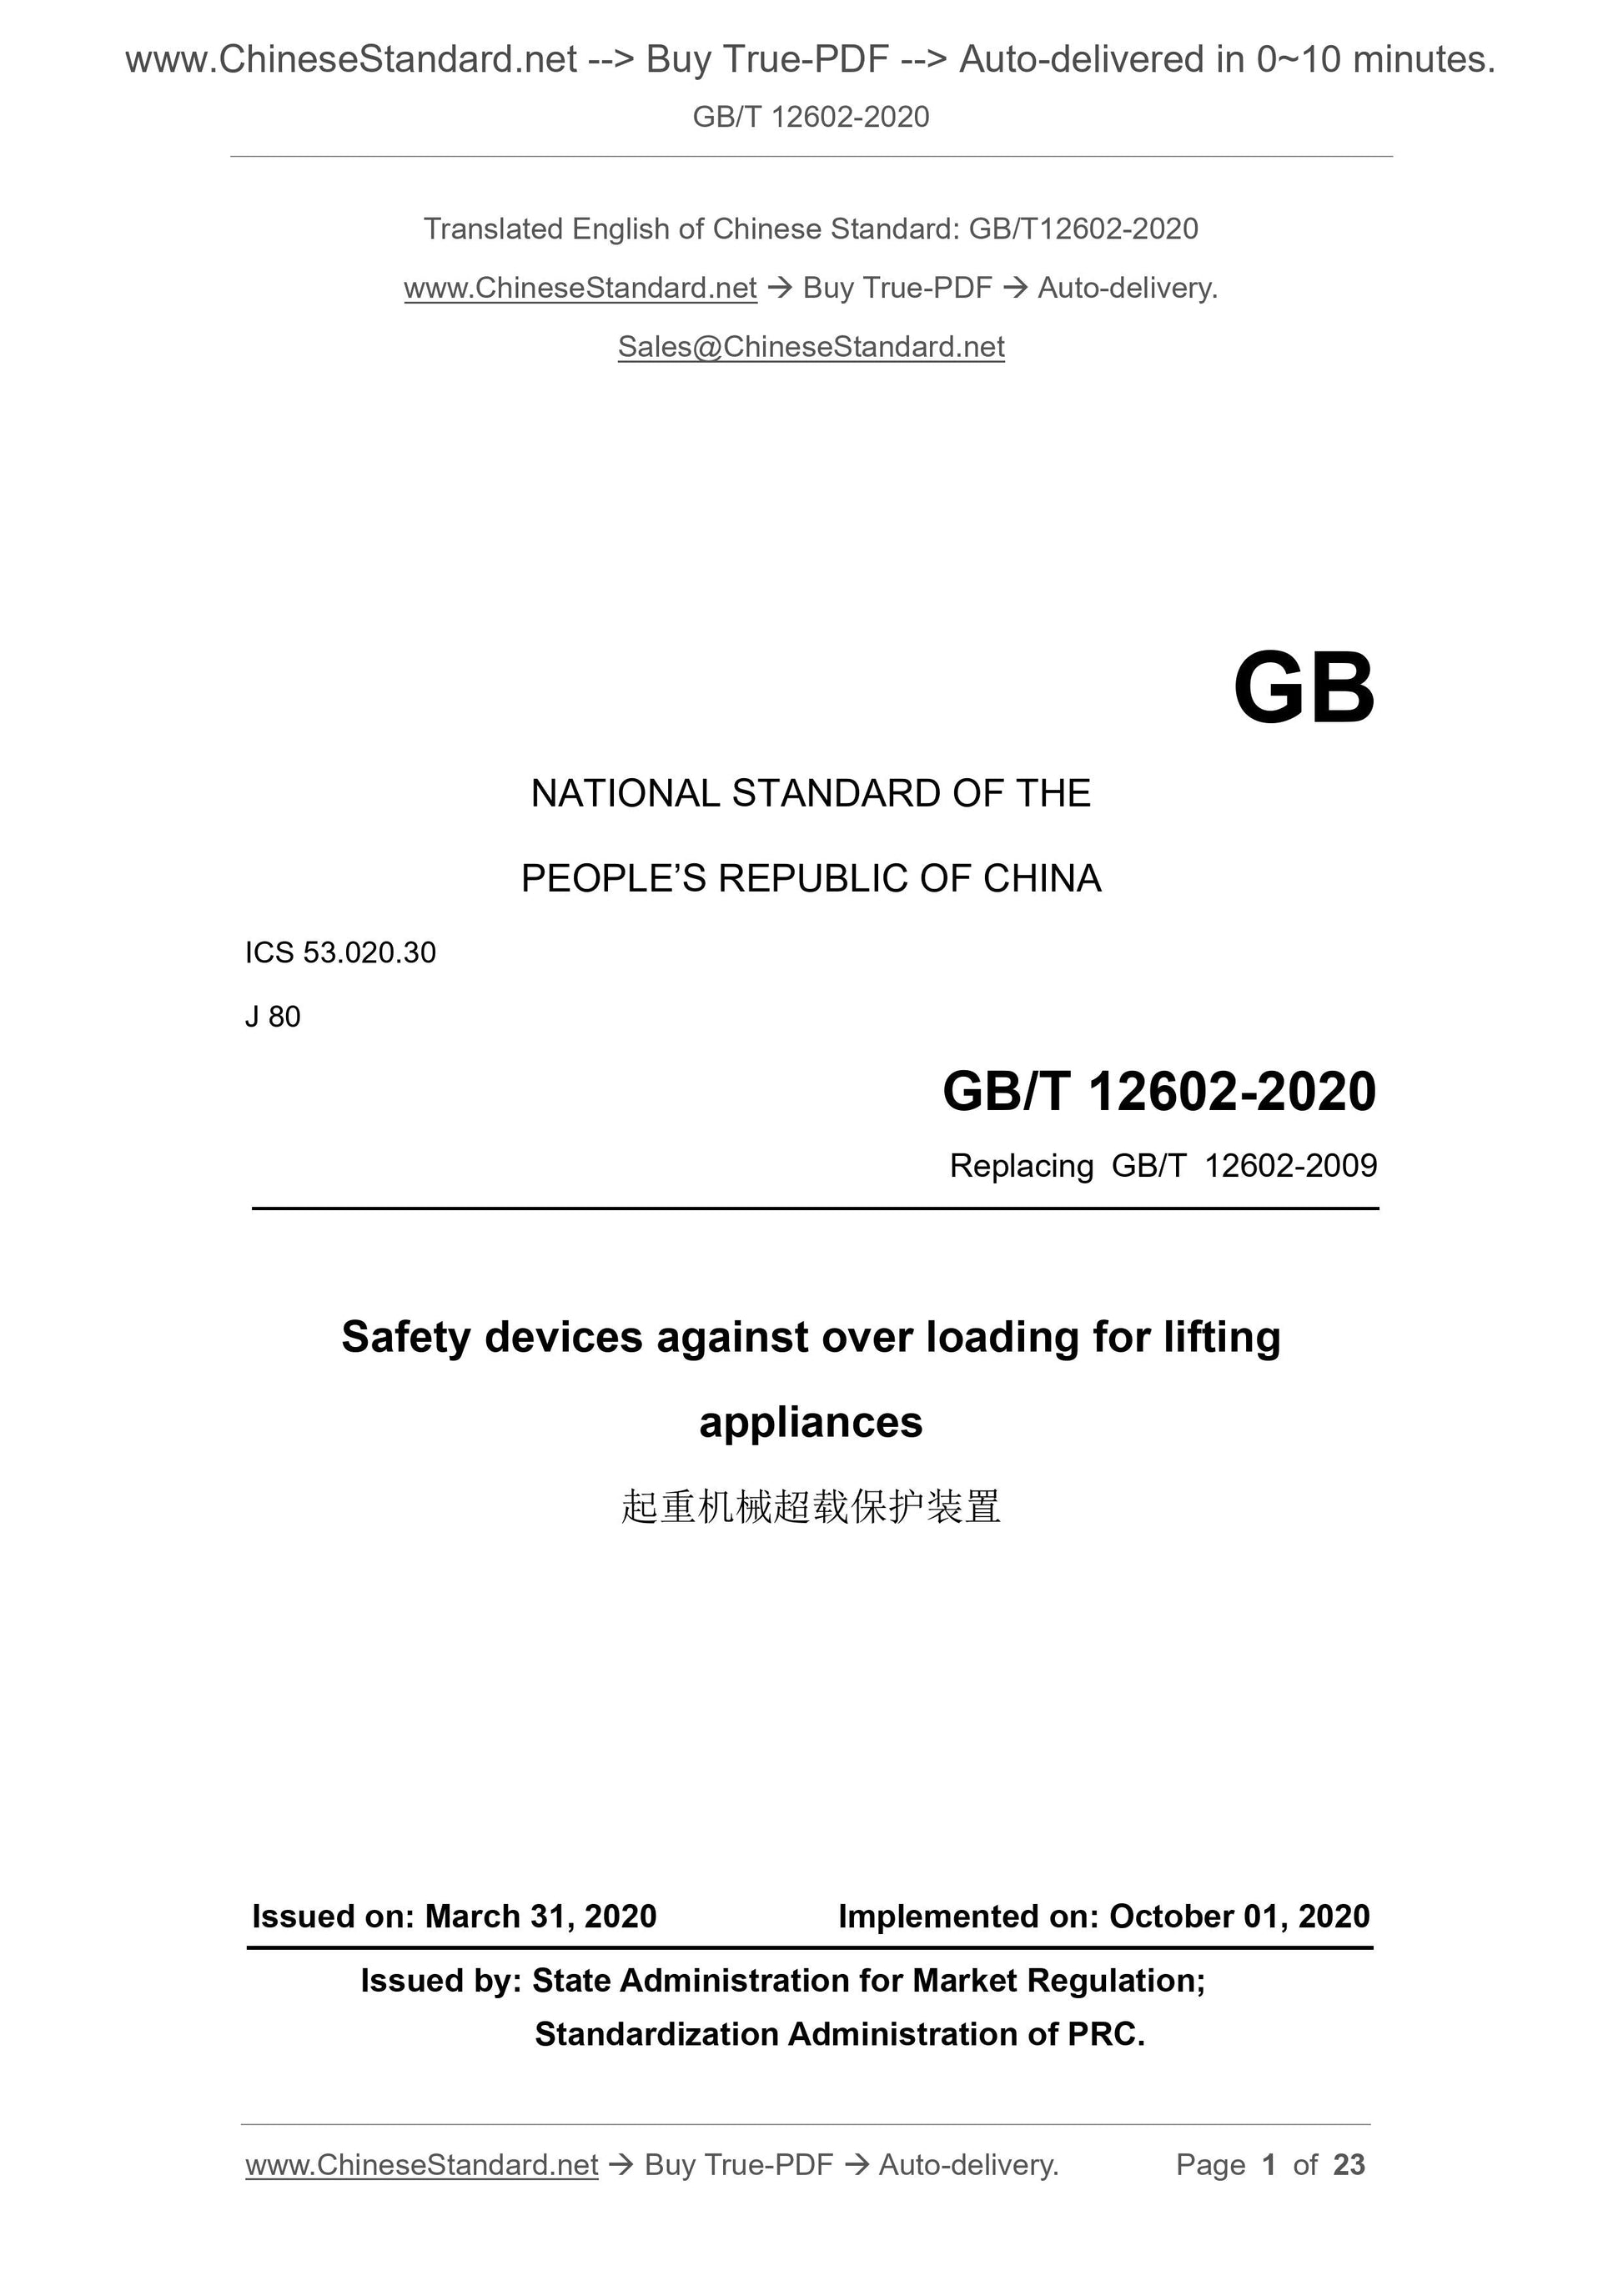 GB/T 12602-2020 Page 1